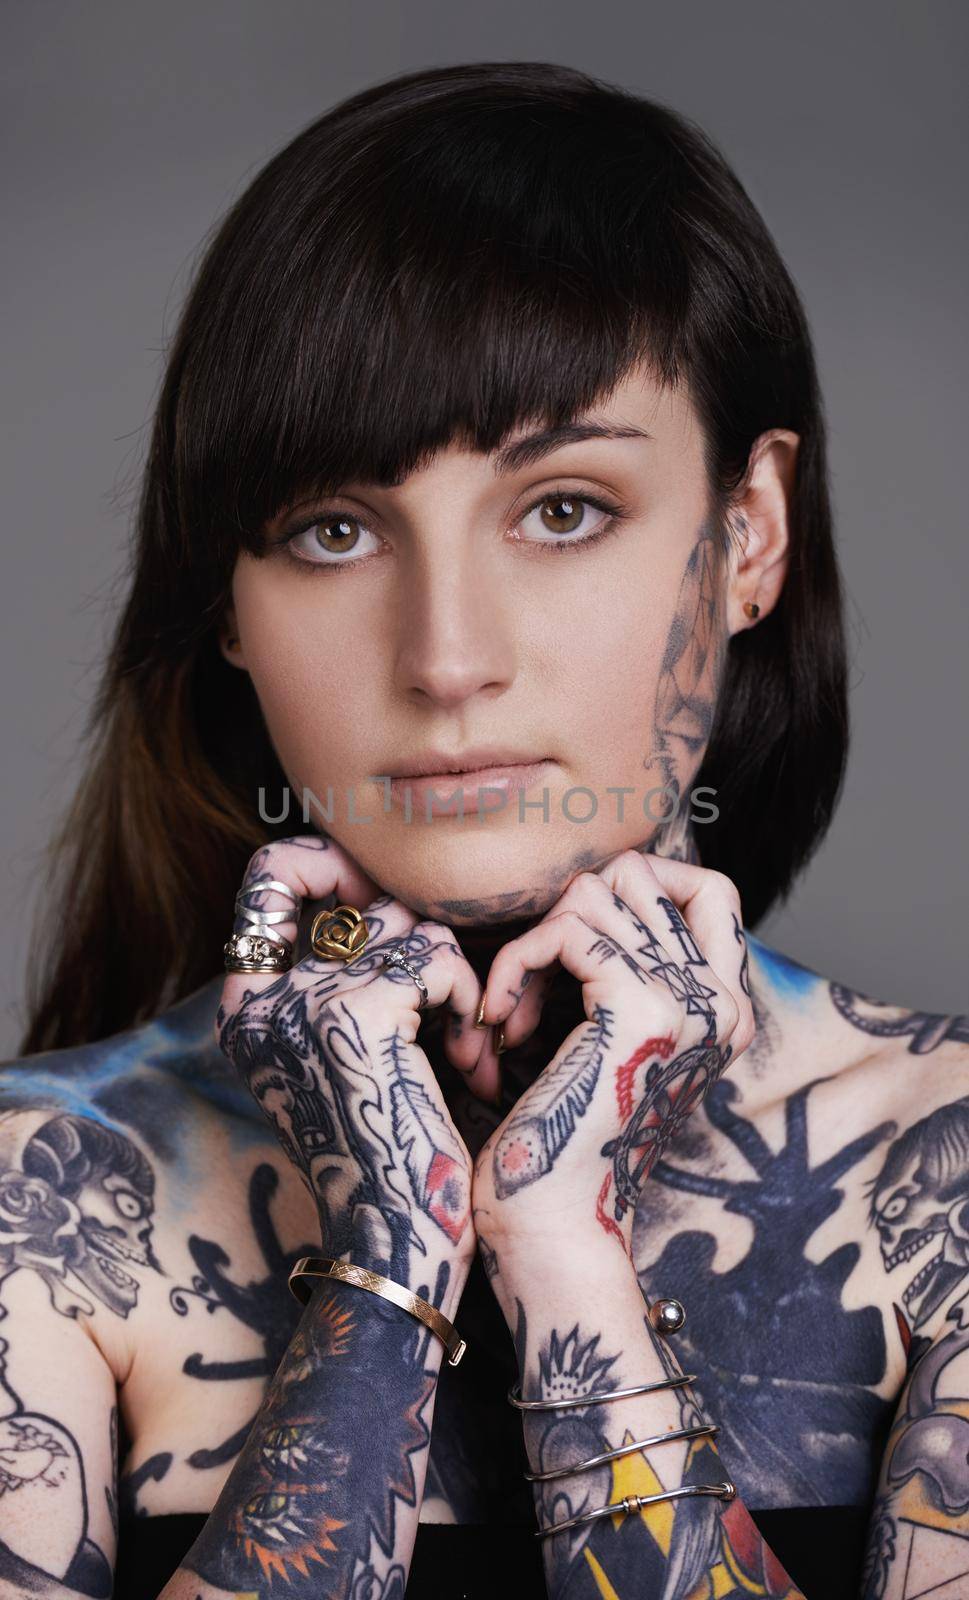 A walking art exhibition. A cropped shot of a tattooed young woman